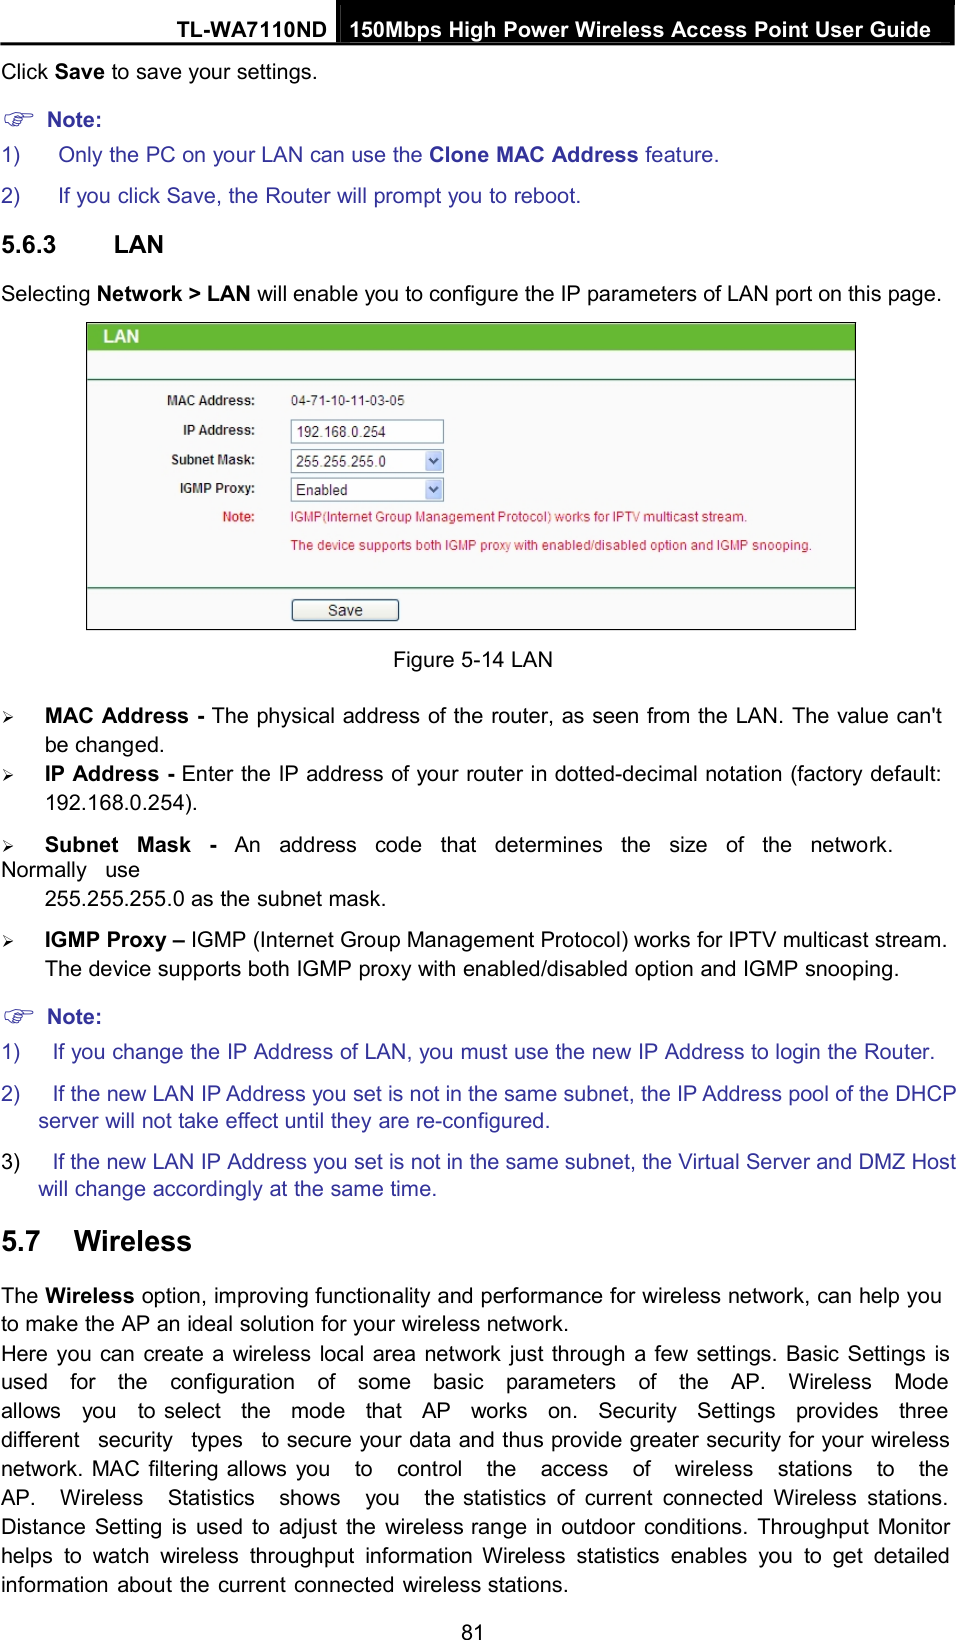 TL-WA7110ND 150Mbps High Power Wireless Access Point User GuideClick Save to save your settings.Note:1) Only the PC on your LAN can use the Clone MAC Address feature.2) If you click Save, the Router will prompt you to reboot.5.6.3 LANSelecting Network &gt; LAN will enable you to configure the IP parameters of LAN port on this page.Figure 5-14 LANMAC Address - The physical address of the router, as seen from the LAN. The value can&apos;tbe changed.IP Address - Enter the IP address of your router in dotted-decimal notation (factory default:192.168.0.254).Subnet Mask - An address code that determines the size of the network.Normally use255.255.255.0 as the subnet mask.IGMP Proxy – IGMP (Internet Group Management Protocol) works for IPTV multicast stream.The device supports both IGMP proxy with enabled/disabled option and IGMP snooping.Note:1) If you change the IP Address of LAN, you must use the new IP Address to login the Router.2) If the new LAN IP Address you set is not in the same subnet, the IP Address pool of the DHCPserver will not take effect until they are re-configured.3) If the new LAN IP Address you set is not in the same subnet, the Virtual Server and DMZ Hostwill change accordingly at the same time.5.7 WirelessThe Wireless option, improving functionality and performance for wireless network, can help youto make the AP an ideal solution for your wireless network.Here you can create a wireless local area network just through a few settings. Basic Settings isused for the configuration of some basic parameters of the AP. Wireless Modeallows you to select the mode that AP works on. Security Settings provides threedifferent security types to secure your data and thus provide greater security for your wirelessnetwork. MAC filtering allows you to control the access of wireless stations to theAP. Wireless Statistics shows you the statistics of current connected Wireless stations.Distance Setting is used to adjust the wireless range in outdoor conditions. Throughput Monitorhelps to watch wireless throughput information Wireless statistics enables you to get detailedinformation about the current connected wireless stations.81